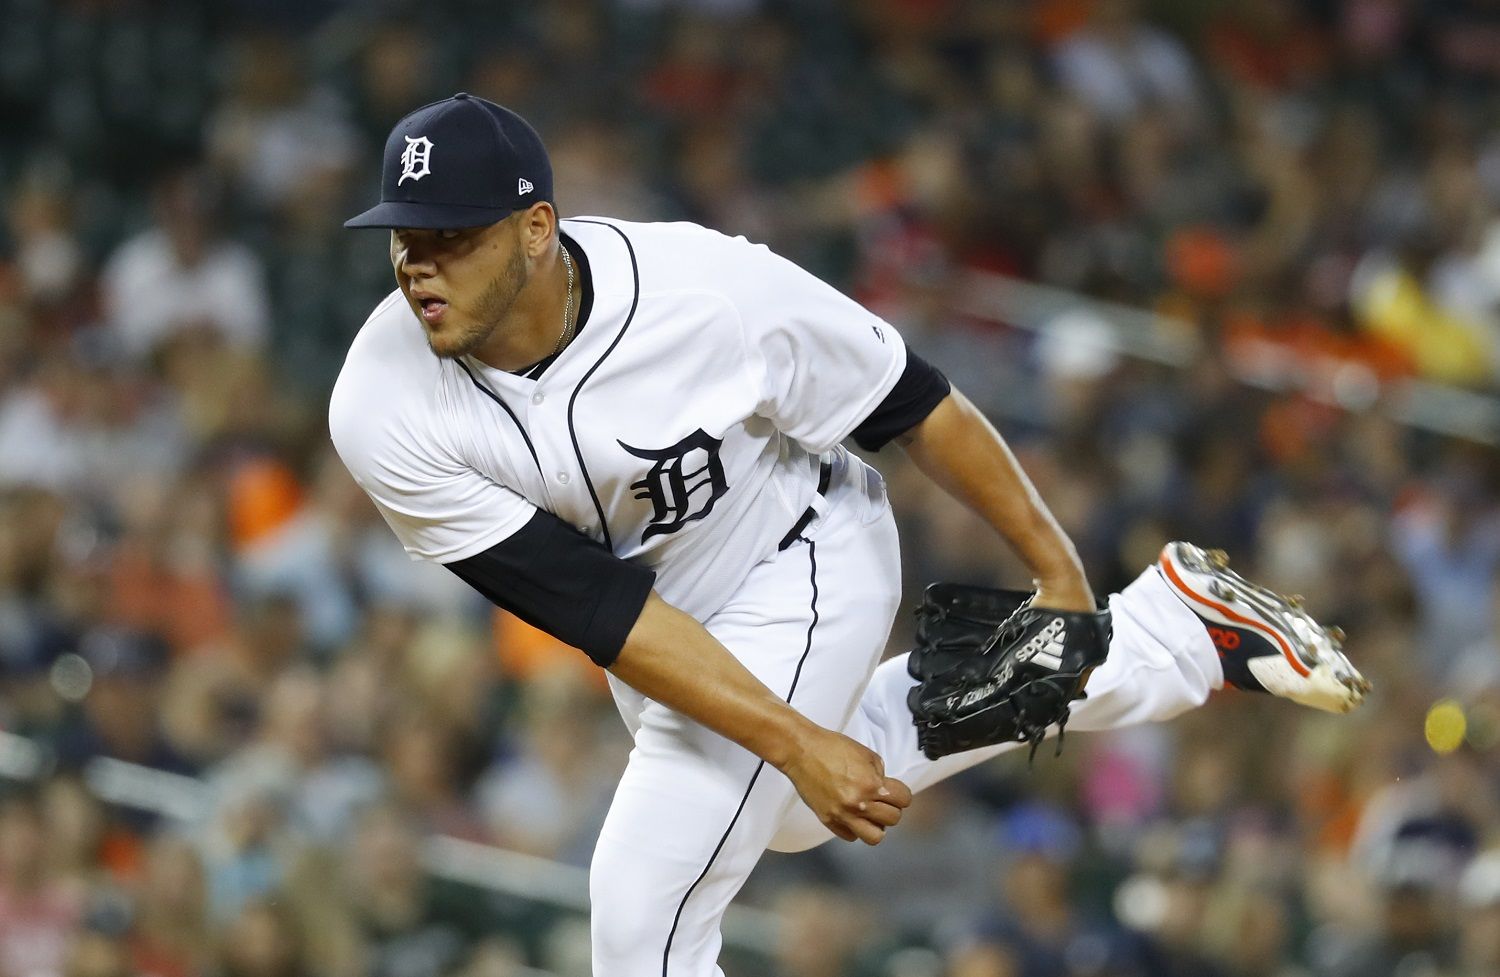 Detroit Tigers relief pitcher Joe Jimenez throws in the eighth inning of a baseball game against the Cleveland Indians in Detroit, Friday, June 8, 2018. (AP Photo/Paul Sancya)